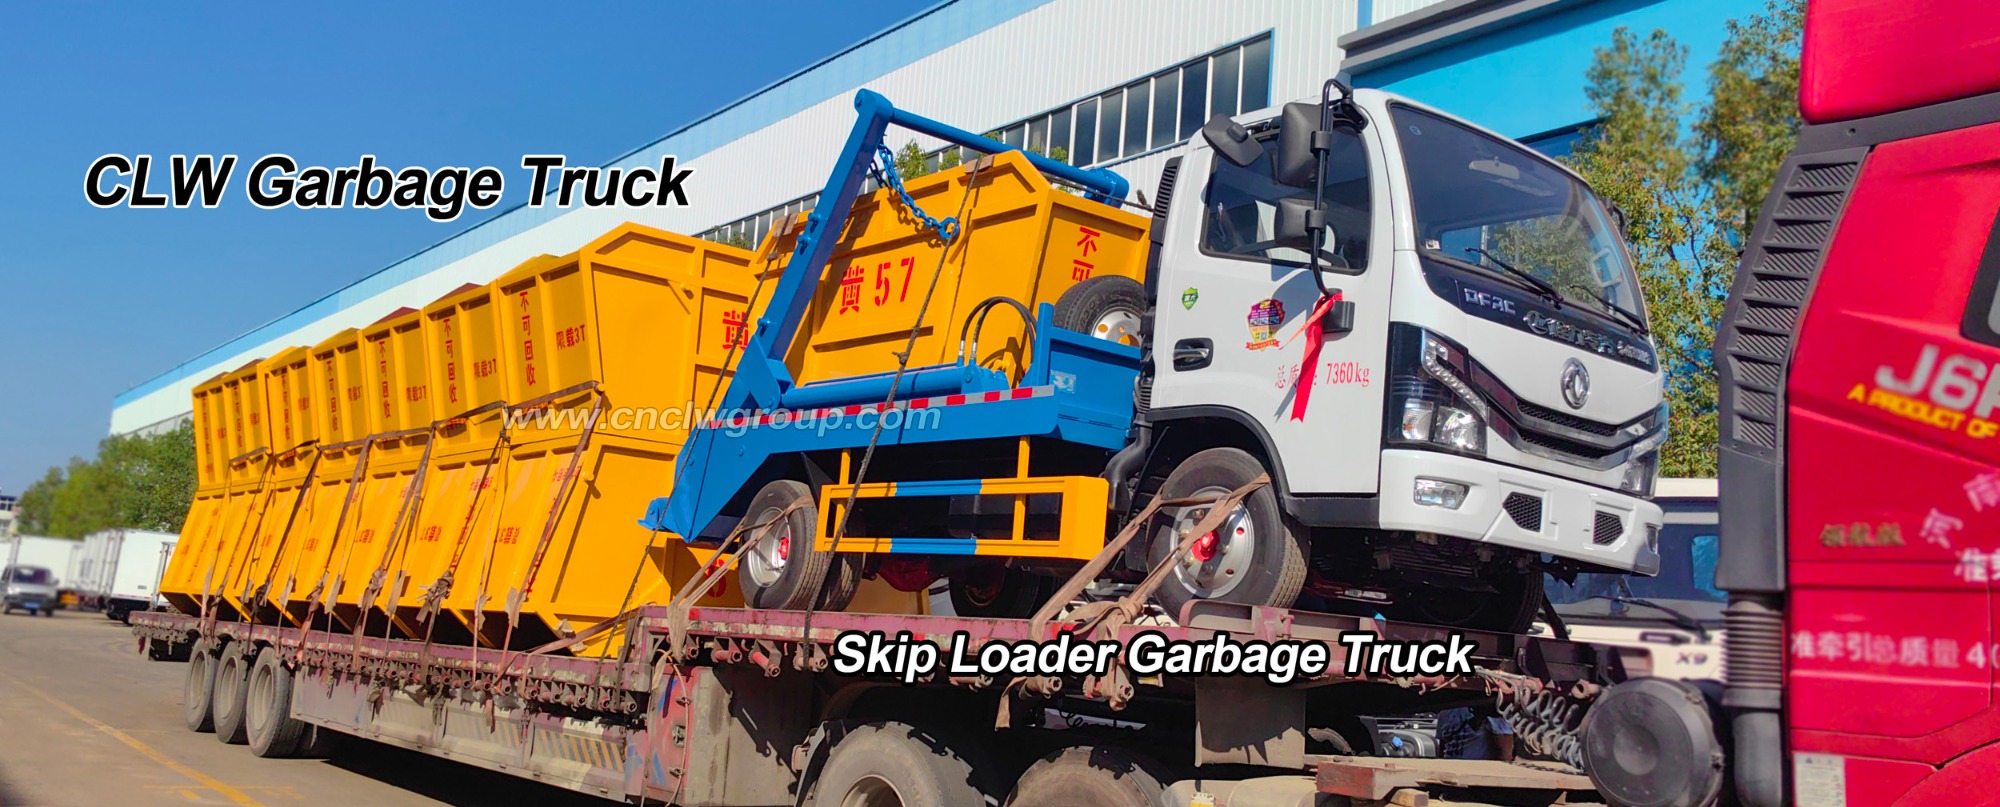 Dongfeng Skip Loader Garbage Truck with Mass Waste Bins